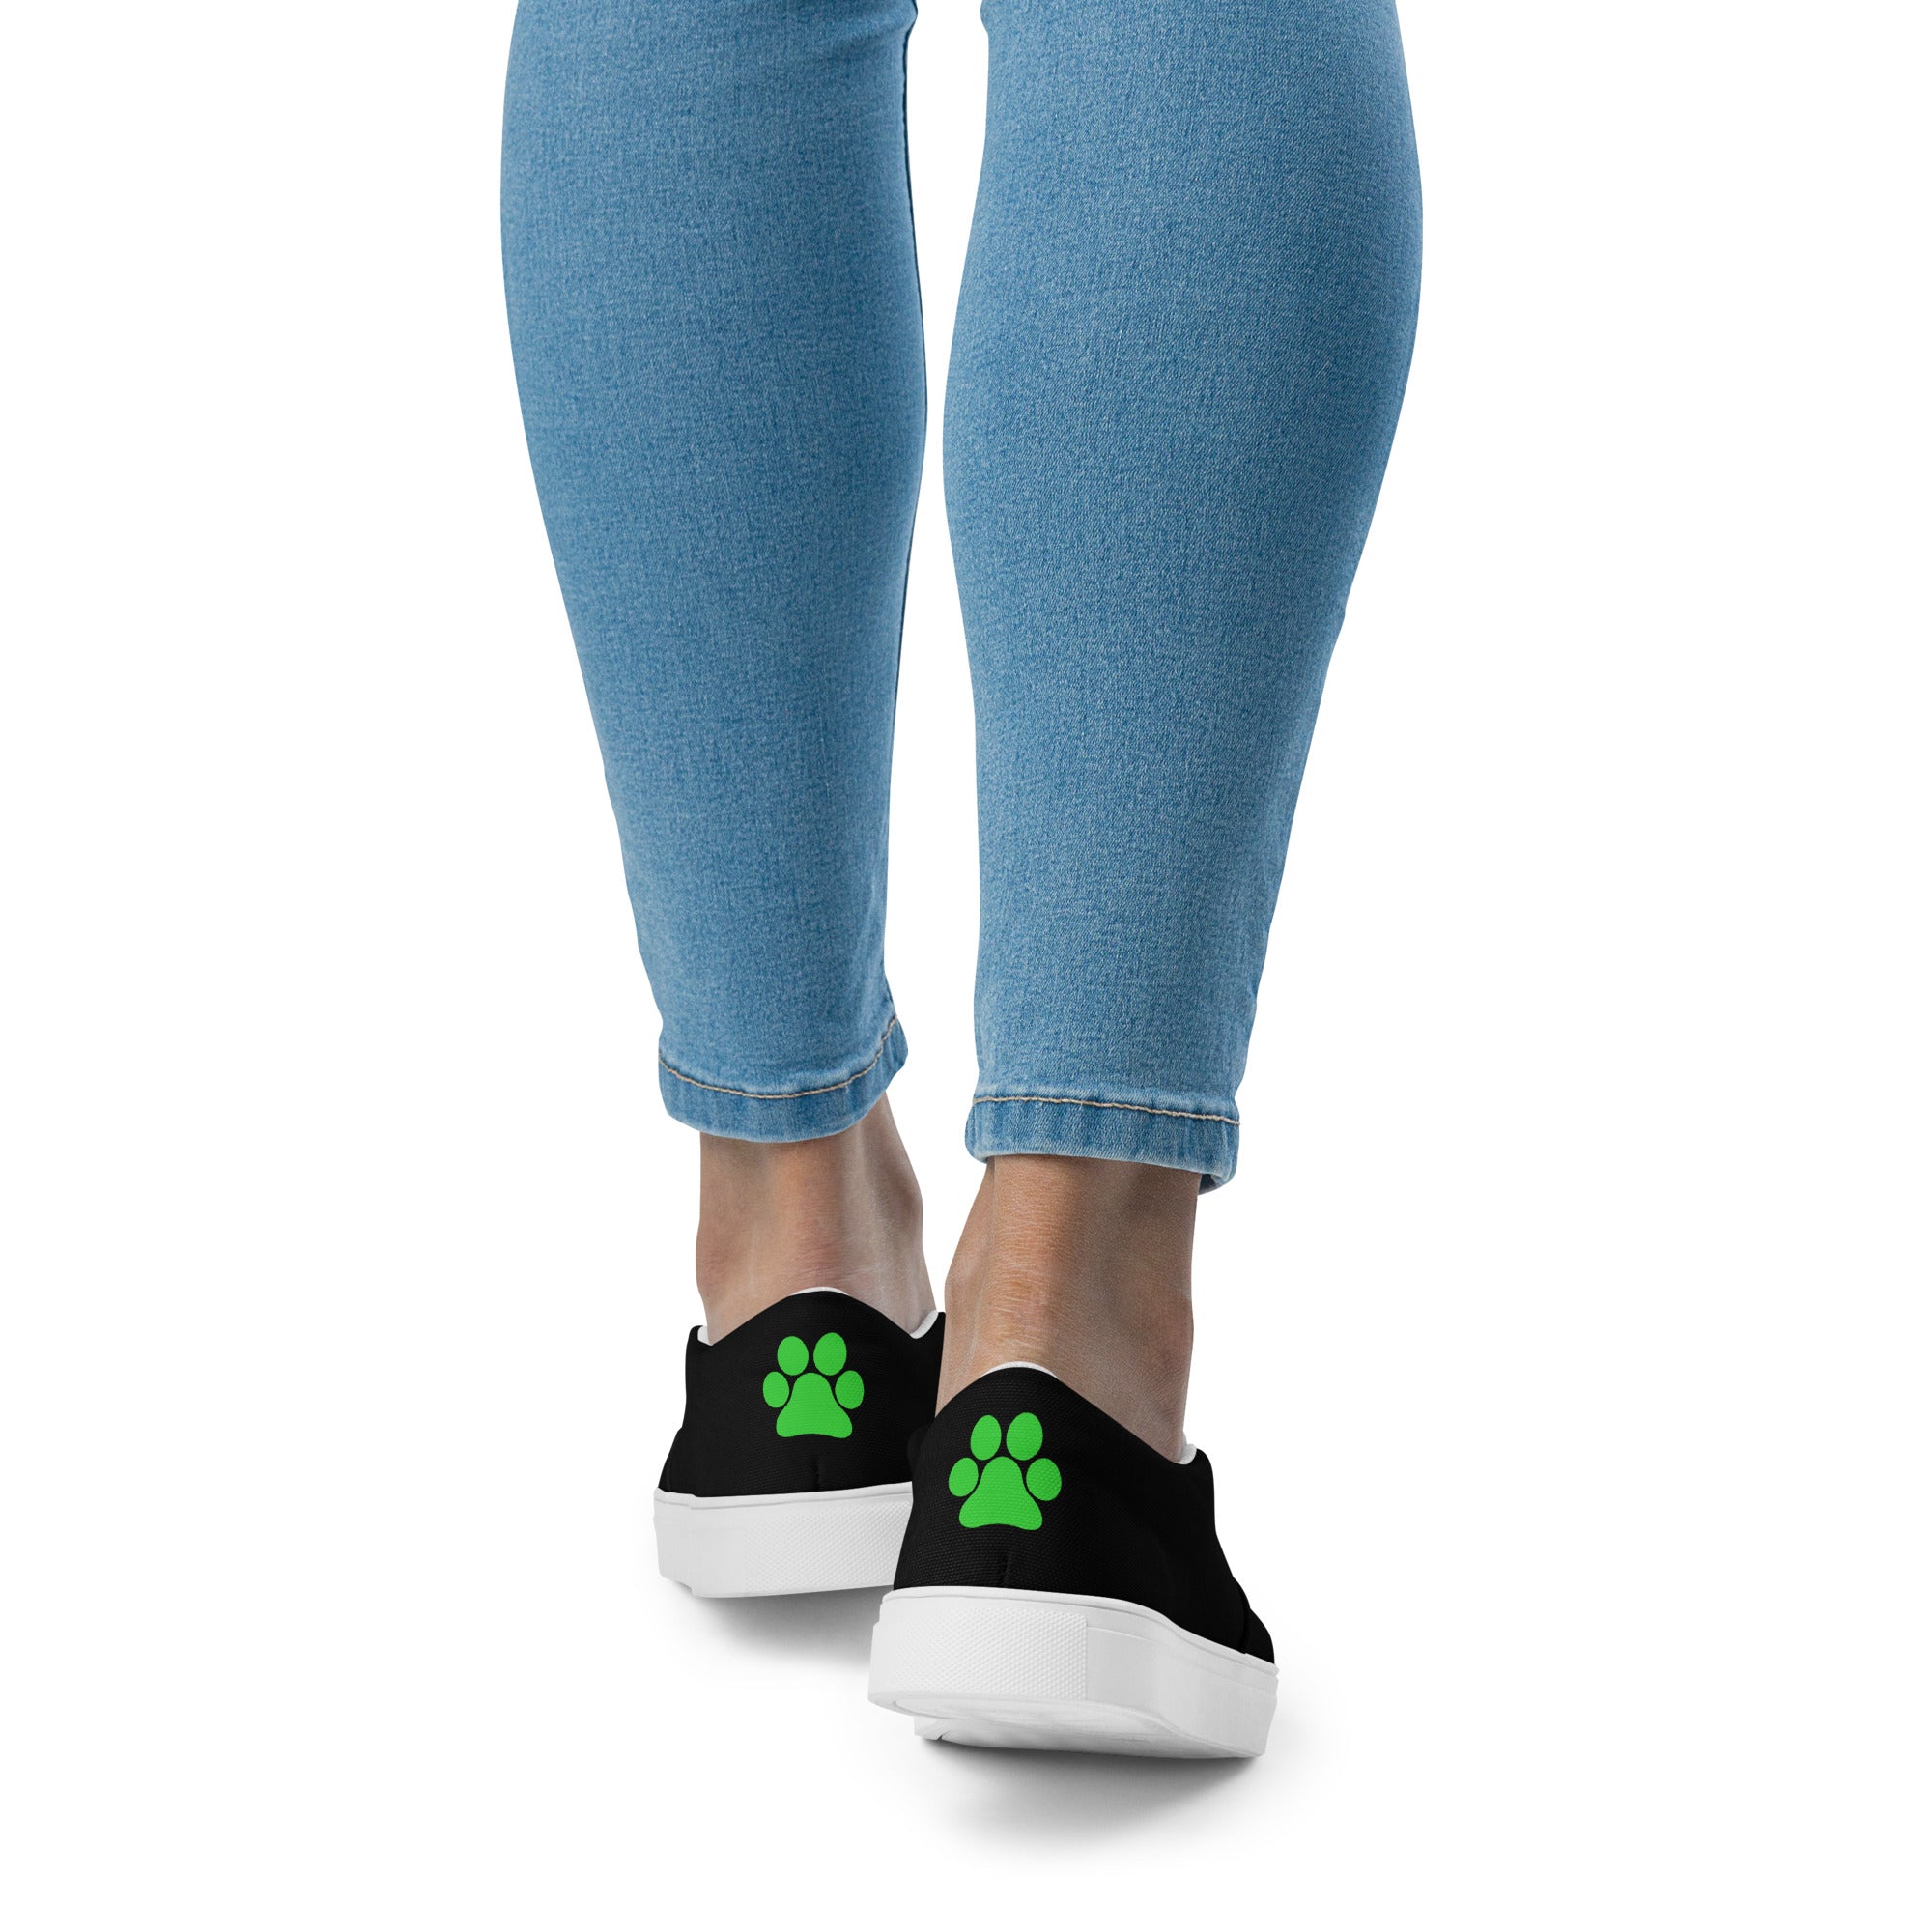 Women’s slip-on Black Lime Paw shoes